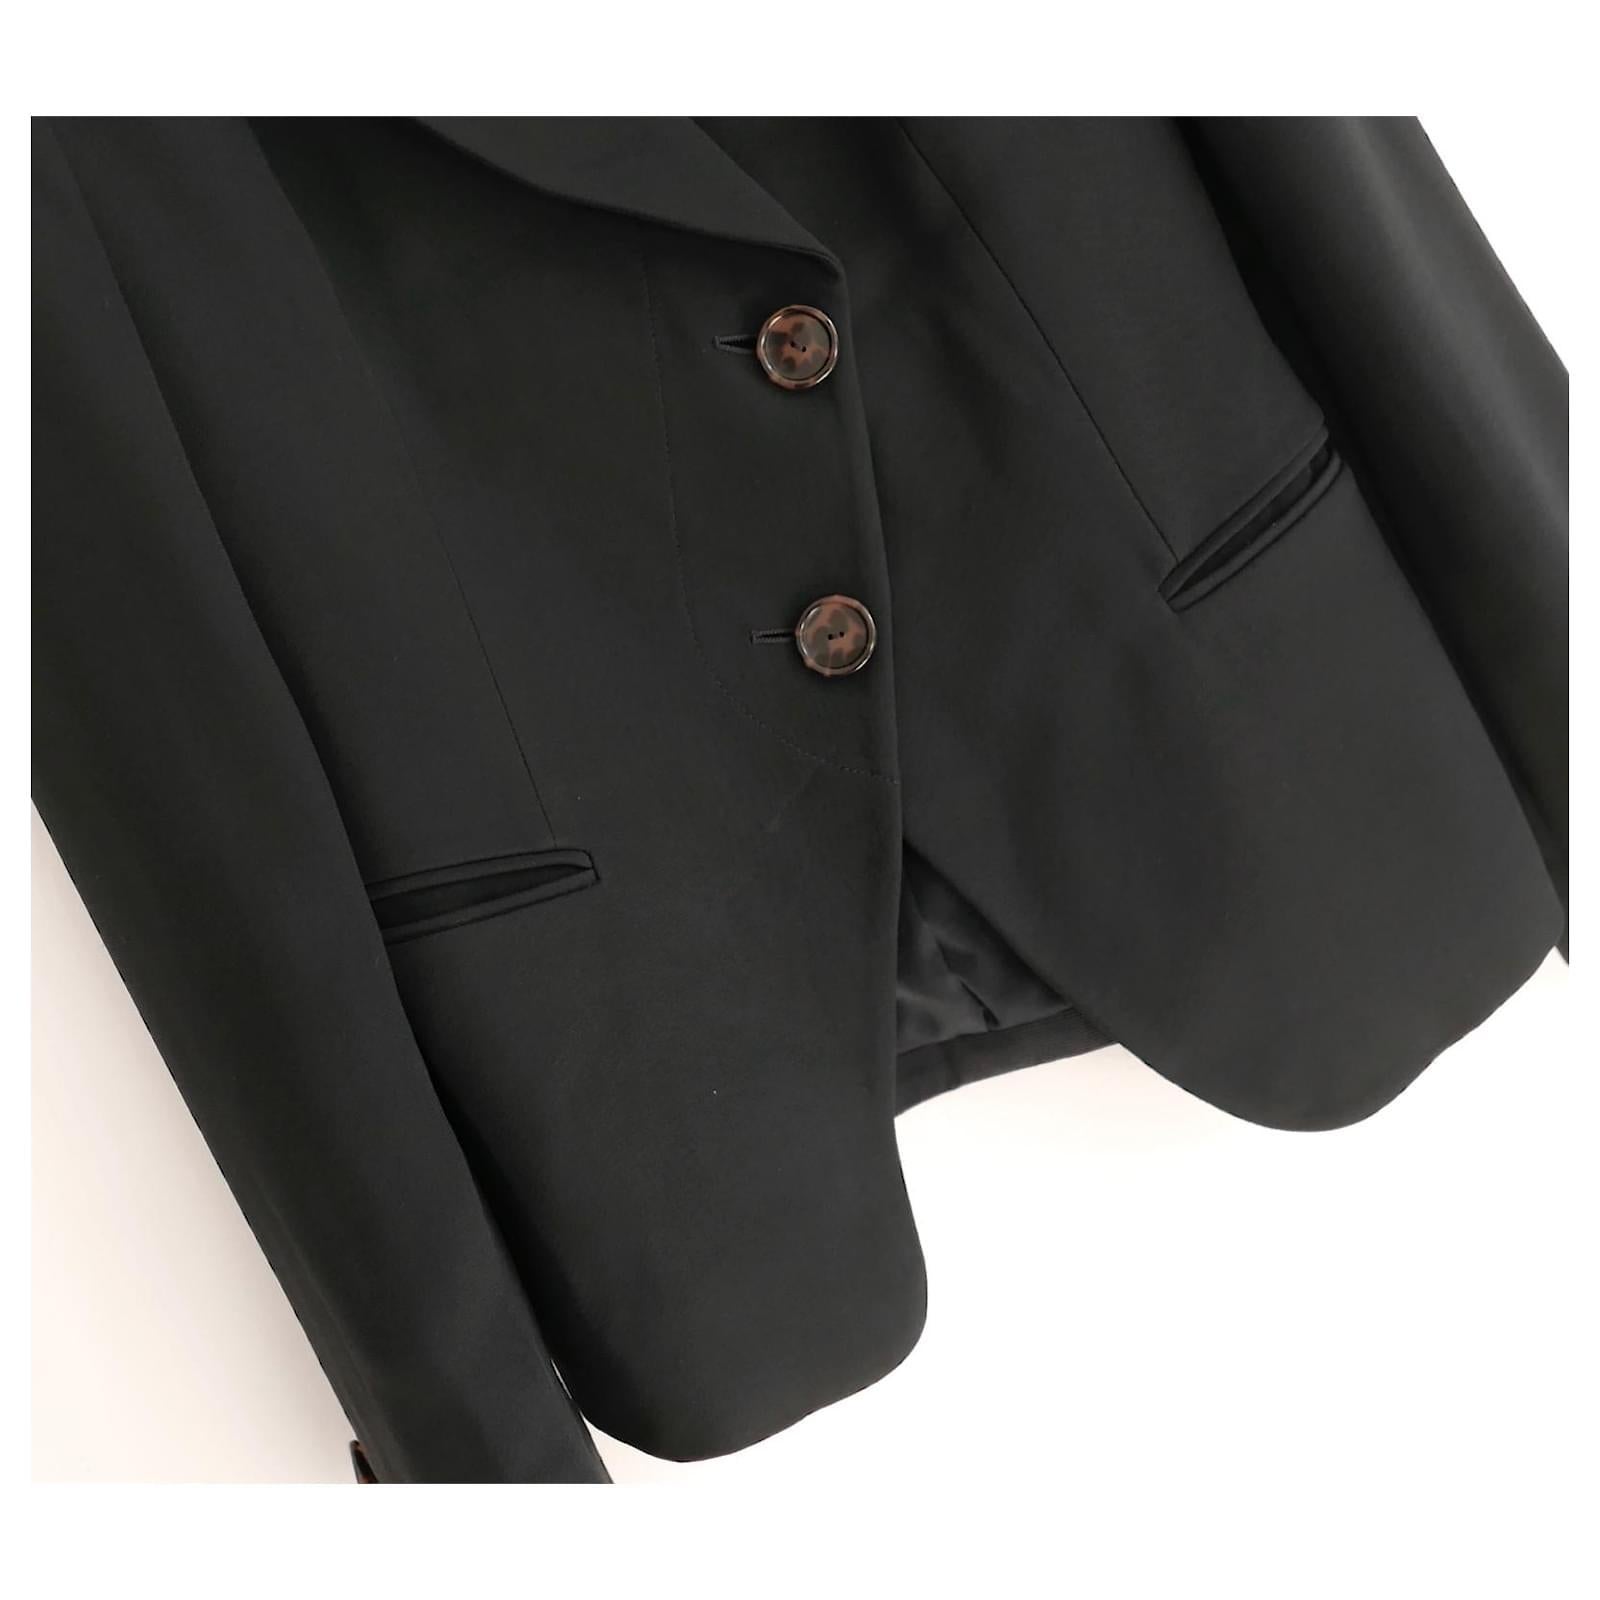 Super on trend, archival 2000s Giorgio Armani slouchy blazer jacket. Worn once. Made from smooth black viscose mix crepe with satin lining. Superbly tailored with an oversized cut, asymmetric lined button front, padded shoulders, welt pockets and